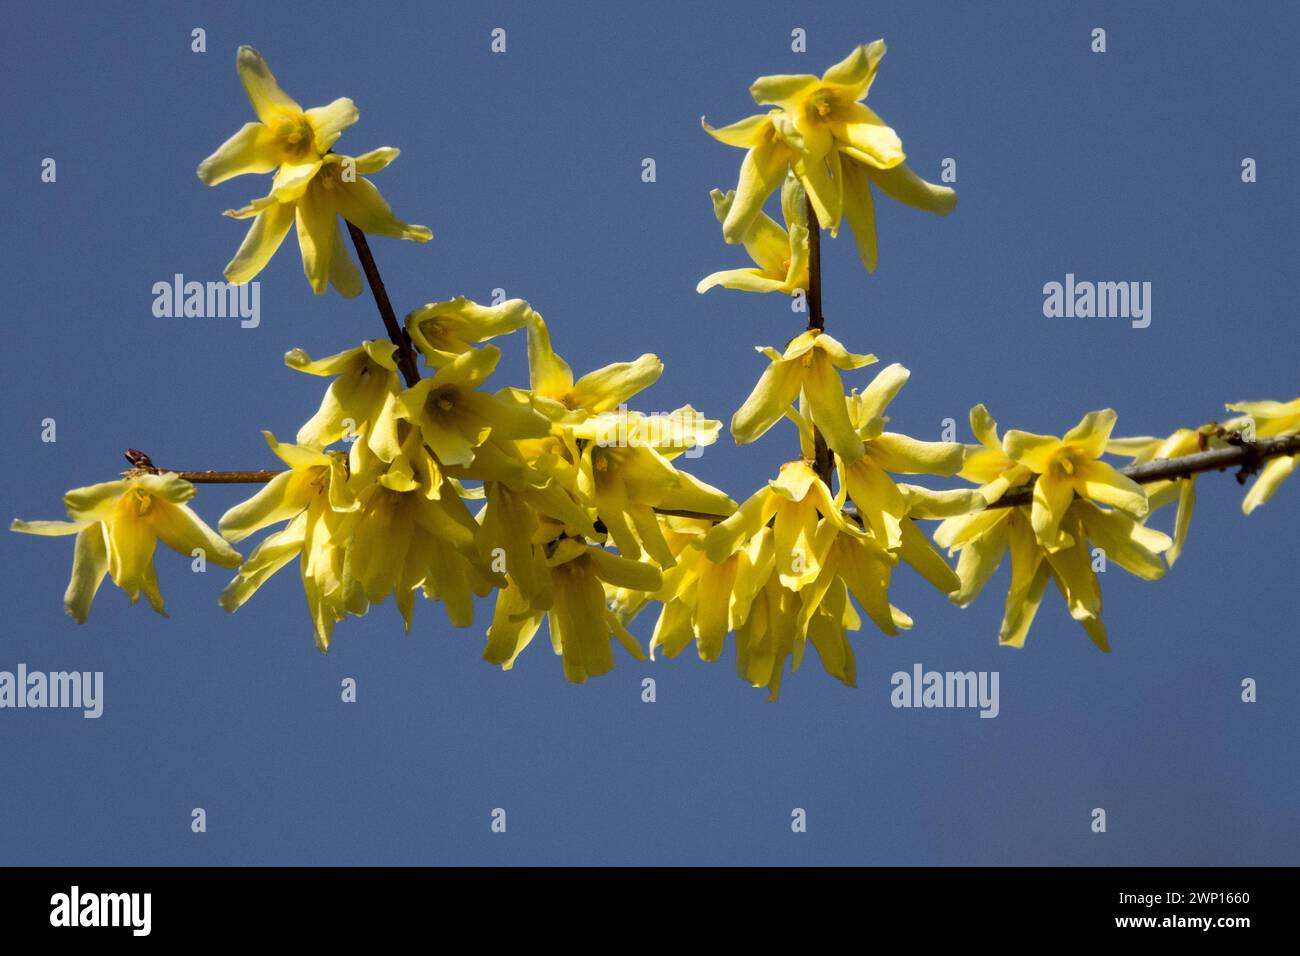 Forsythia giraldiana Fleur Close-up Yellow Blooms on Branch Forsythia Bloom Flowers Late Winter floraison March Blooming Twig Closeup Arbuste Banque D'Images